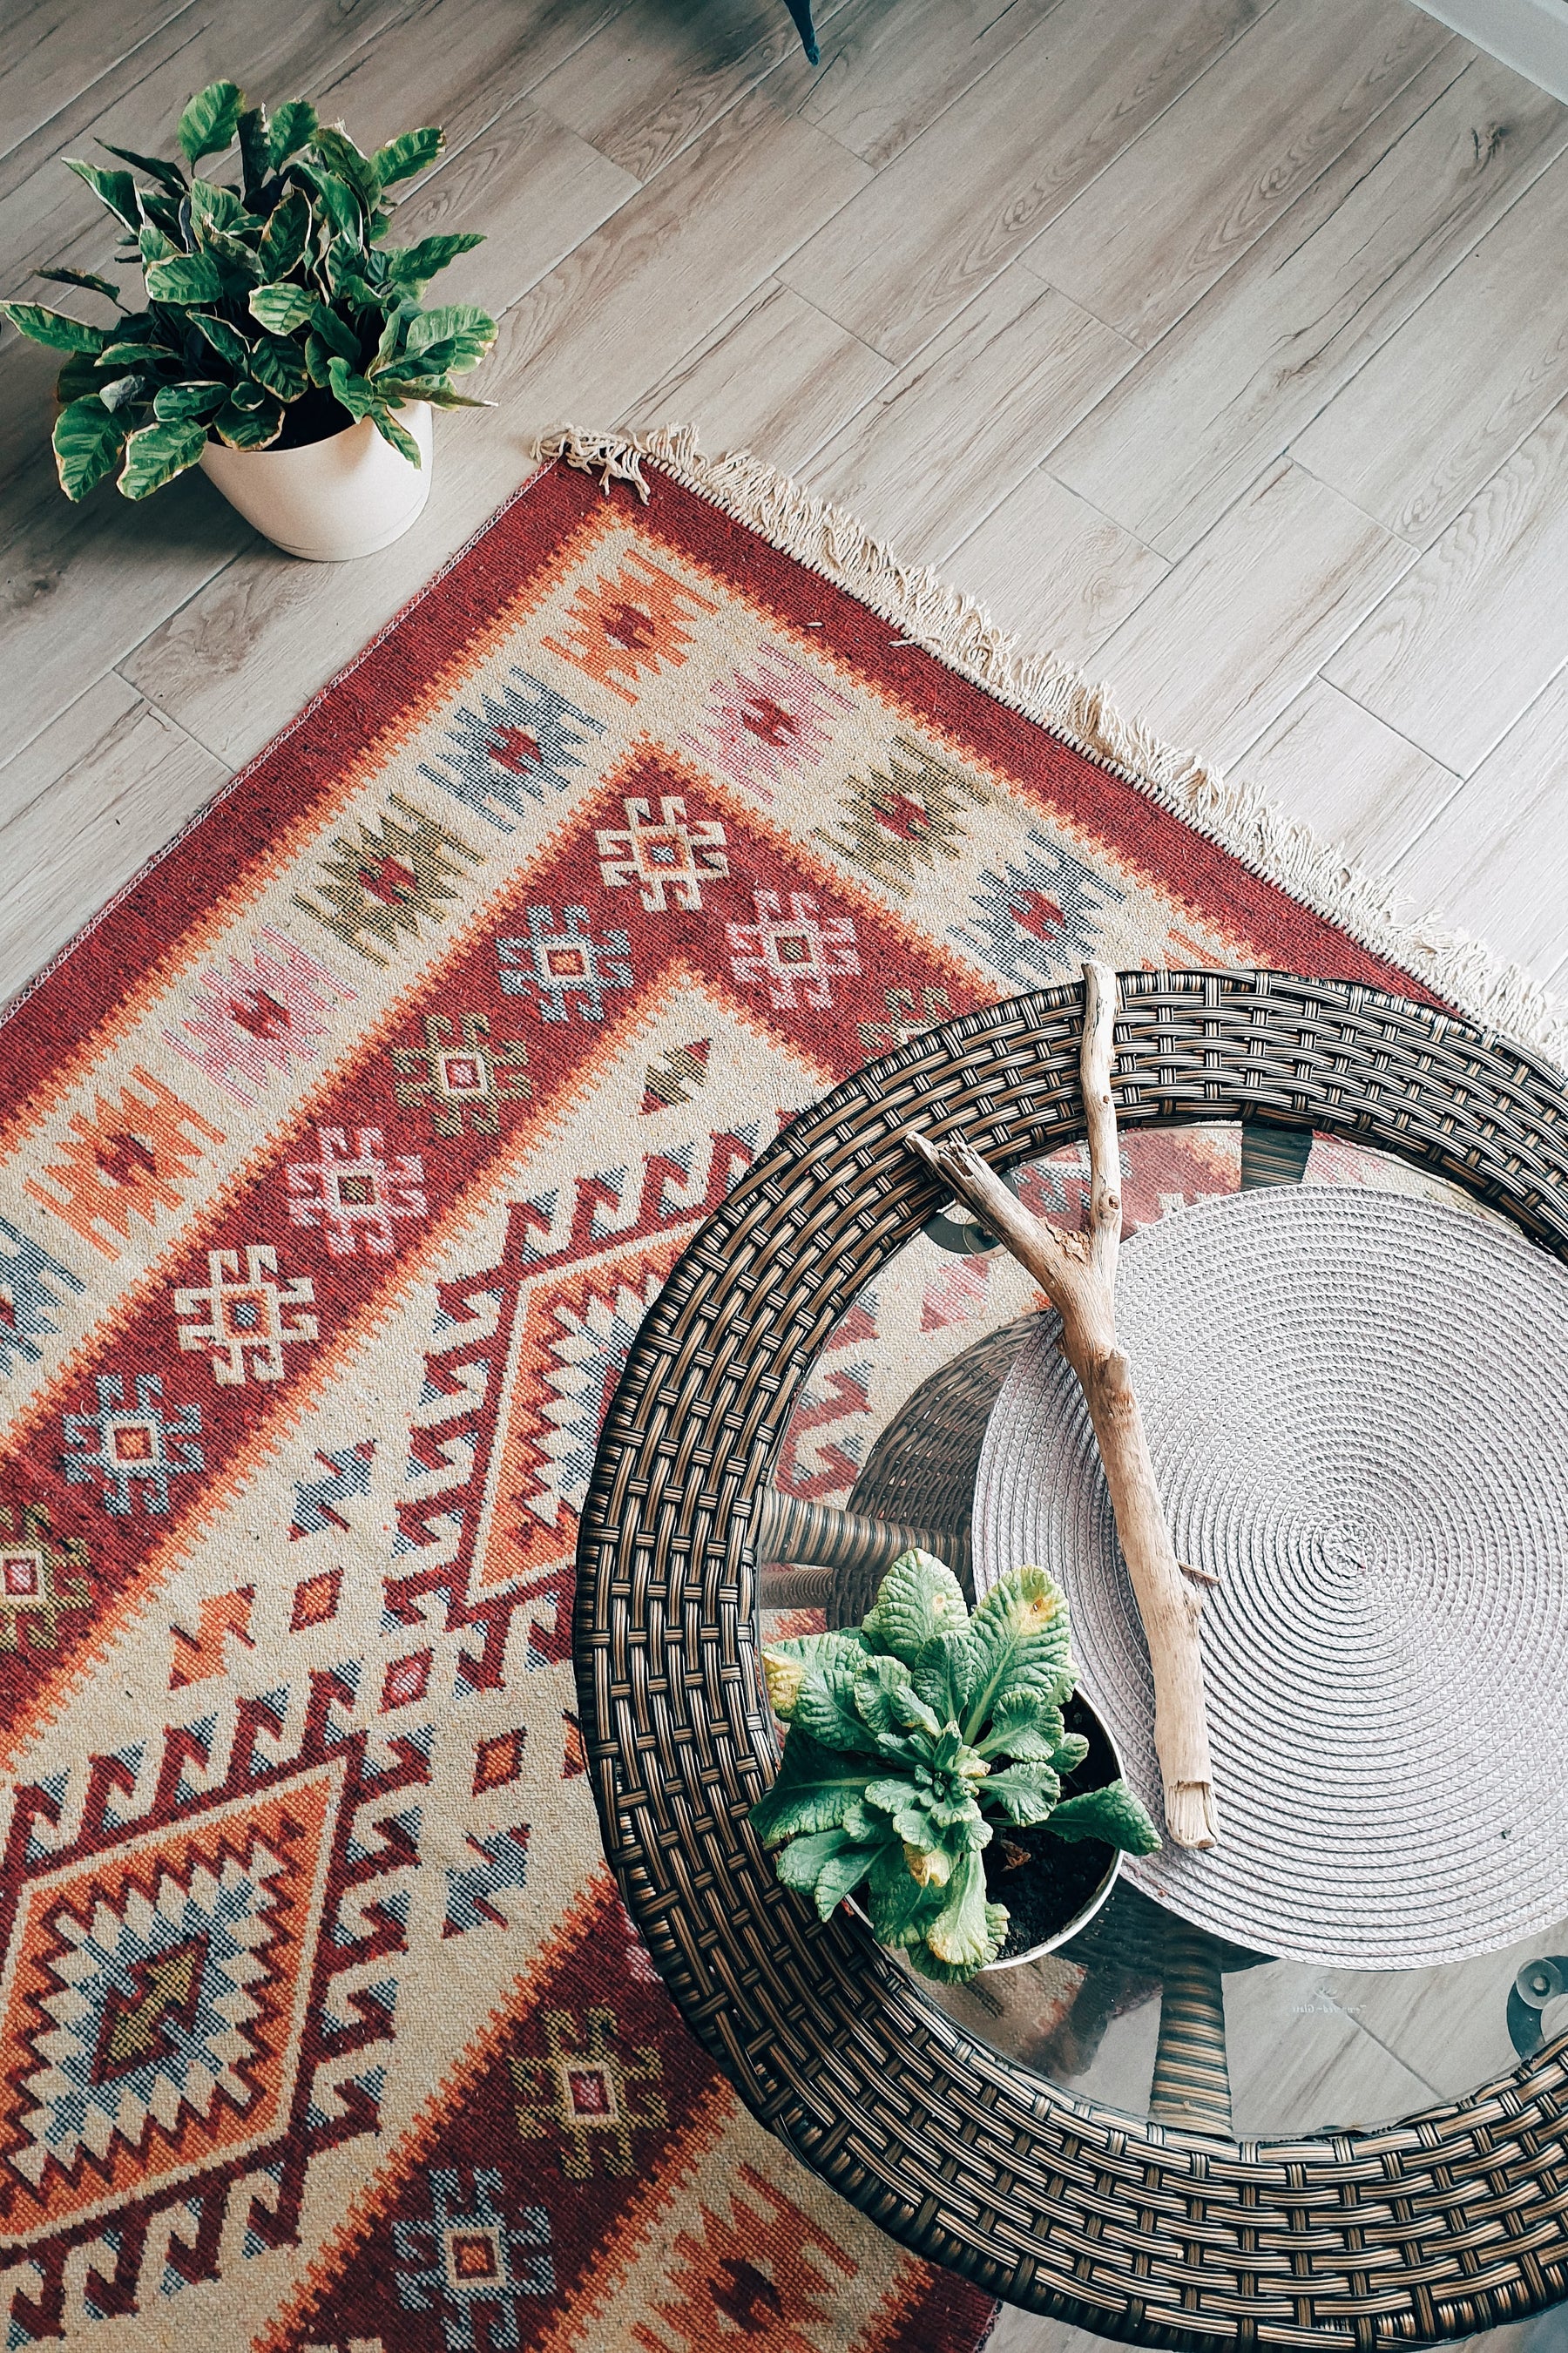 What part of your home/office do you most want to glamour up with rugs?